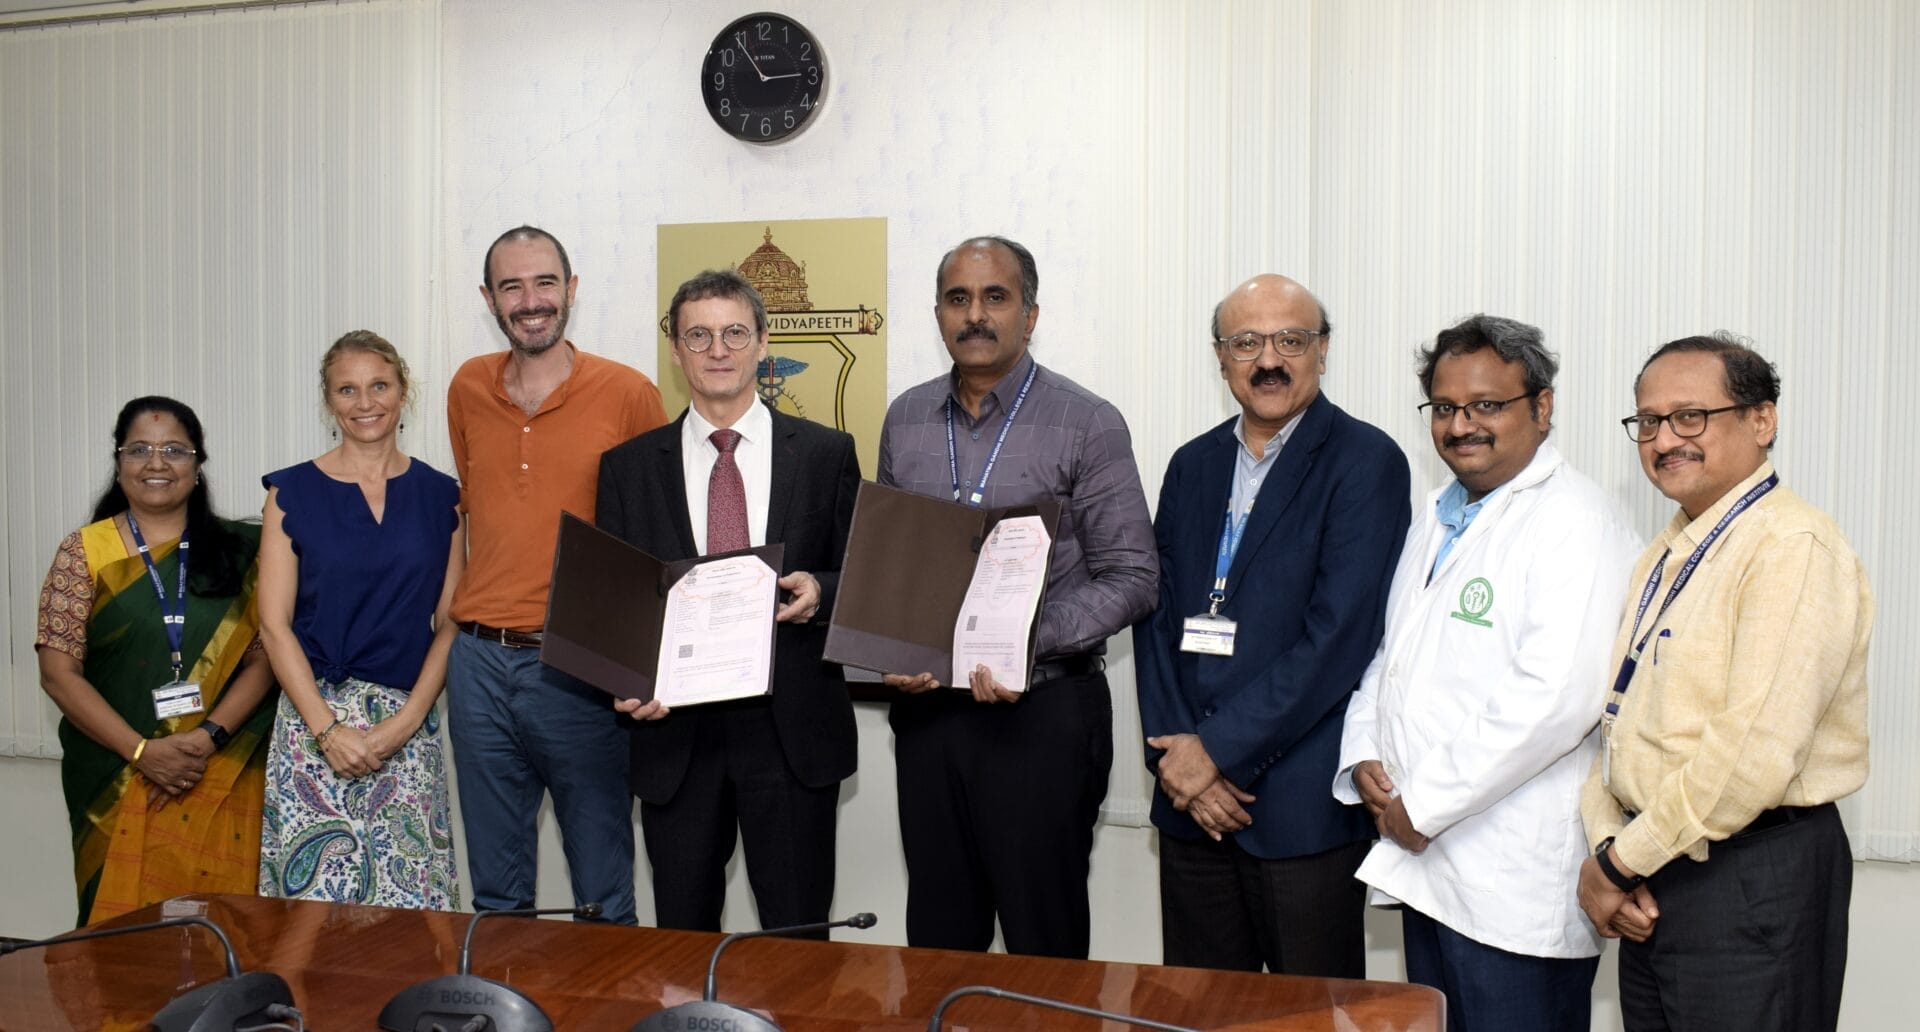 Partnership on School Mental Health Programme between Mahatma Gandhi Medical College and Research Institute and Lycee Francais International Pondicheery